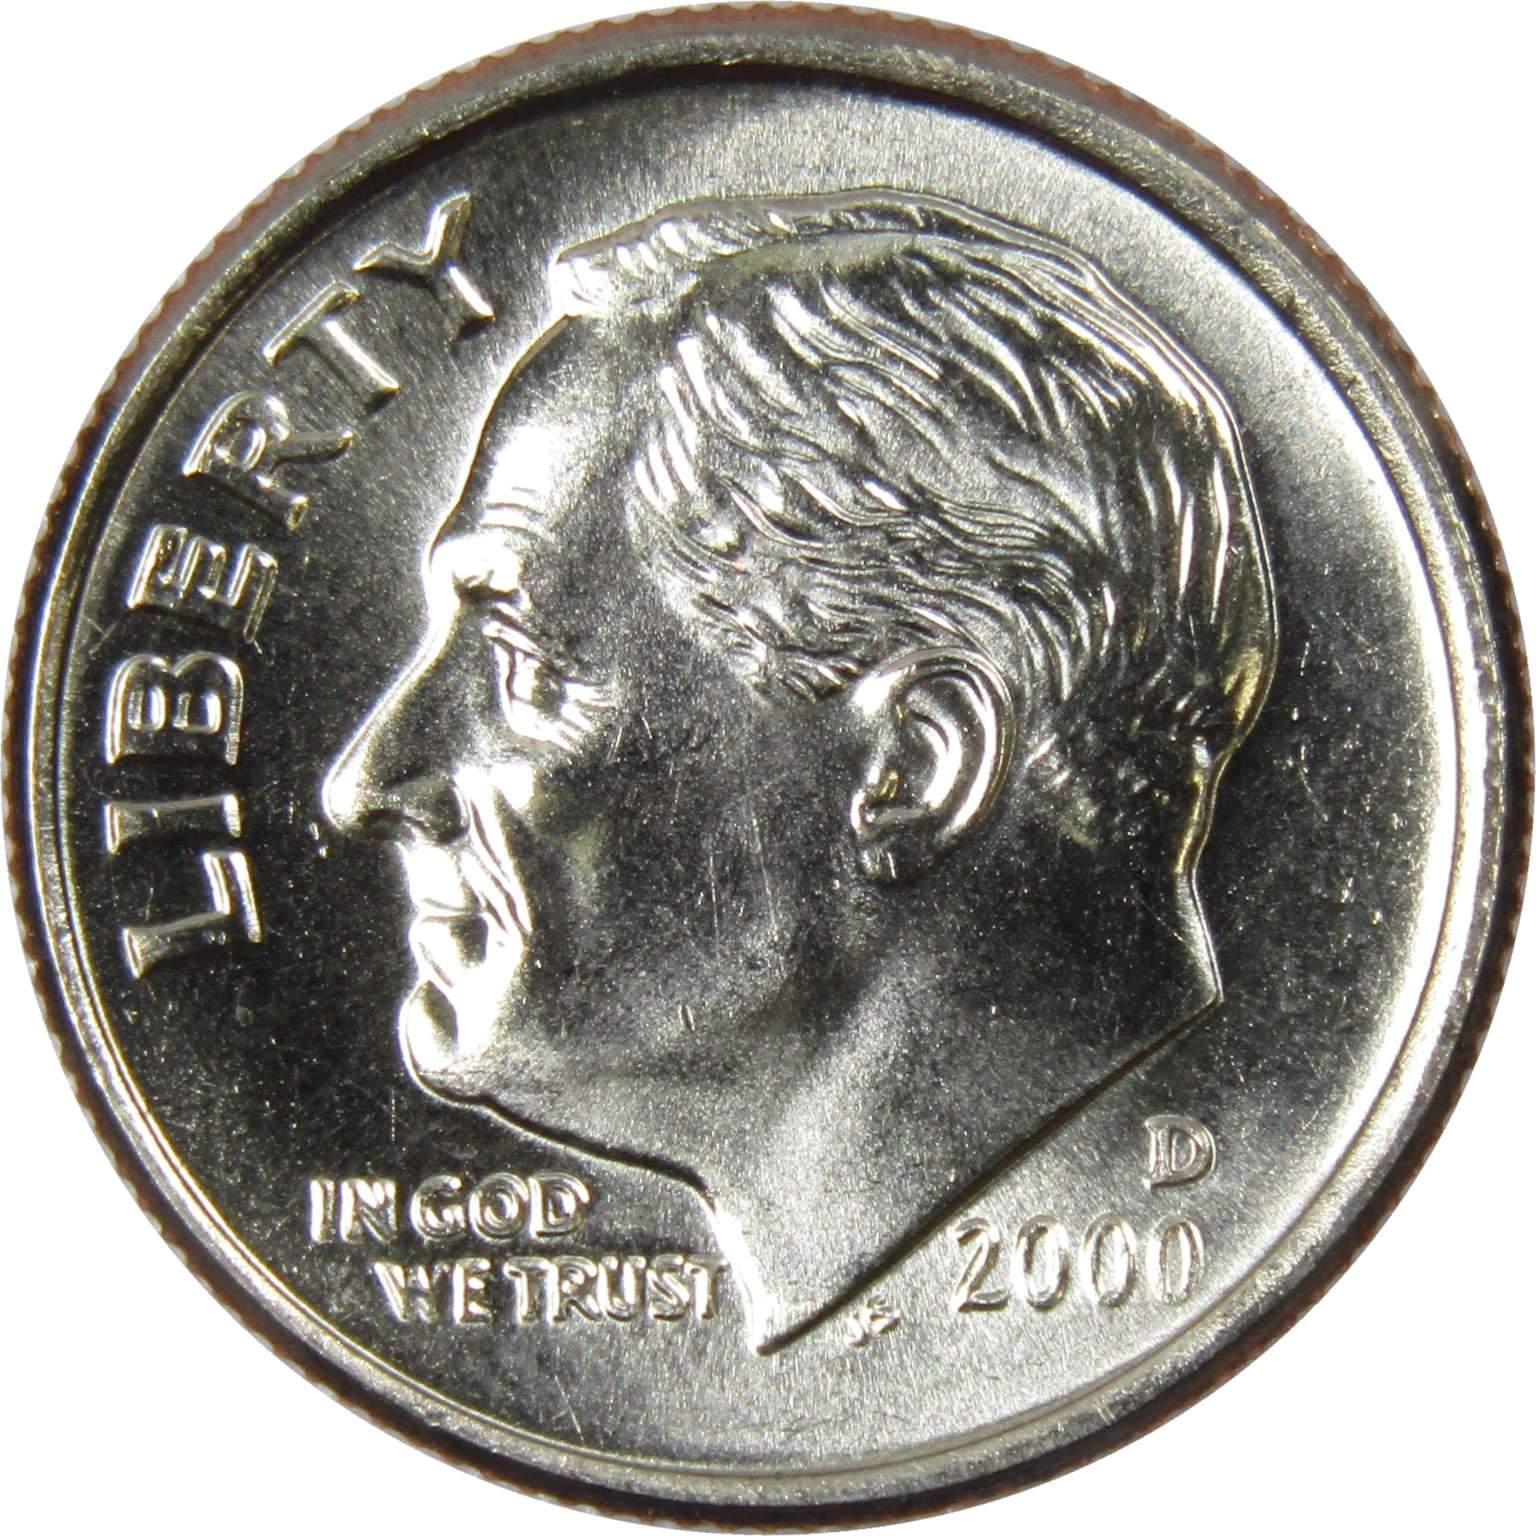 2000 D Roosevelt Dime BU Uncirculated Mint State 10c US Coin Collectible